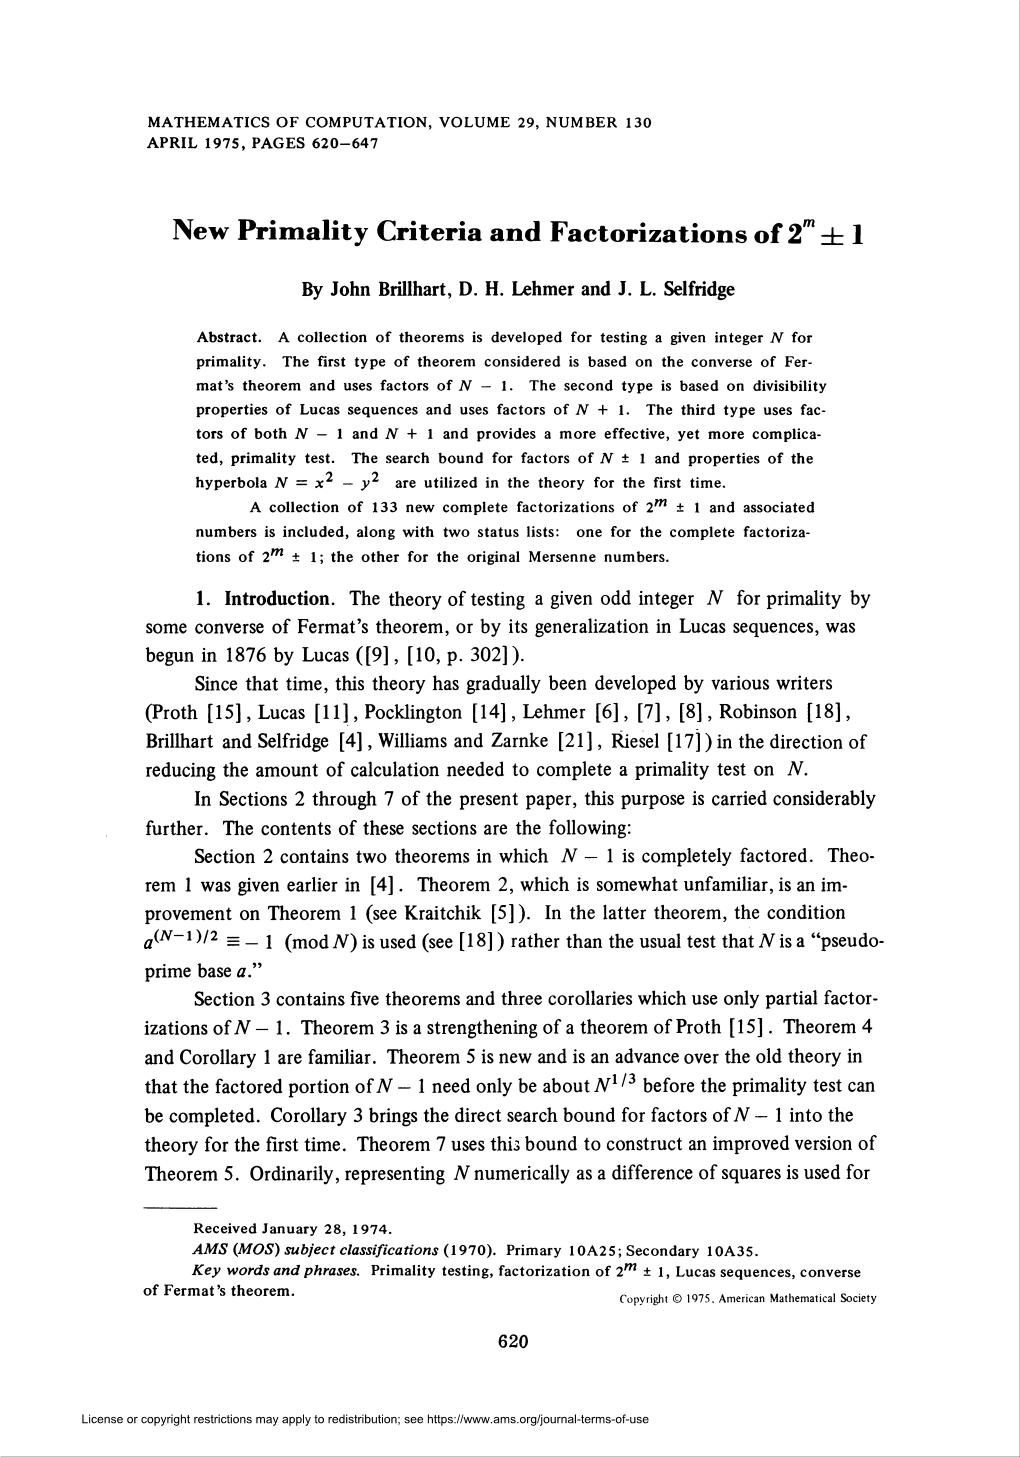 New Primality Criteria and Factorizations of 2™ D= 1